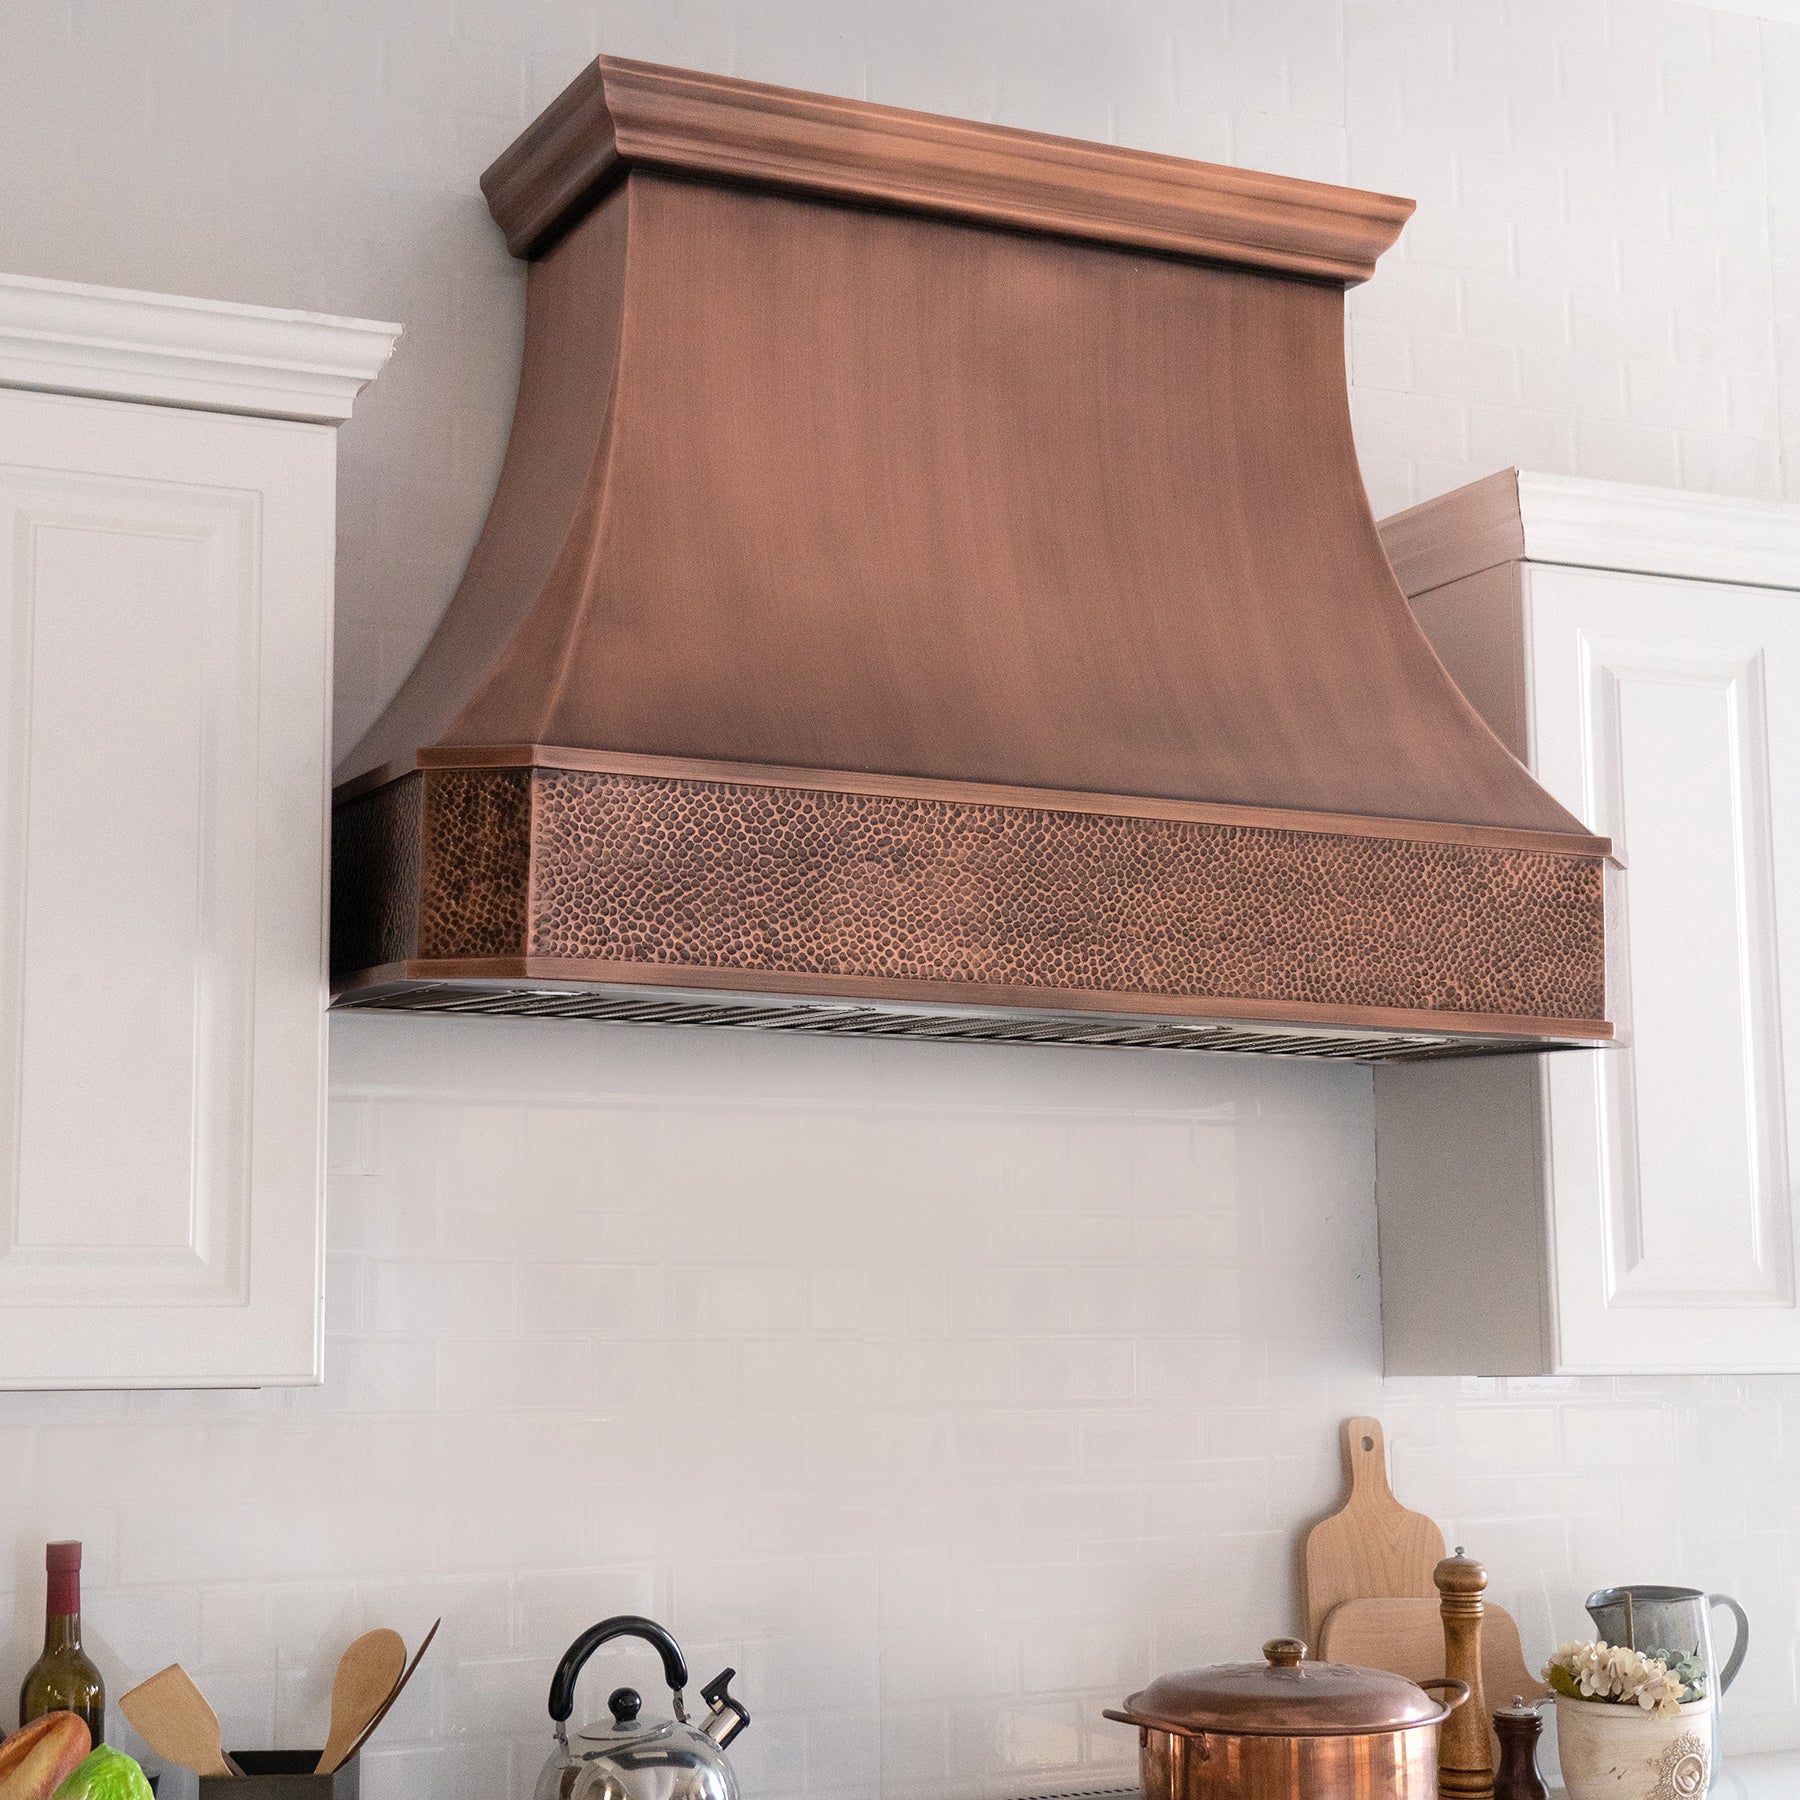 Fobest Classic Curved Antique Copper Range Hood FCP-69 - Fobest Appliance